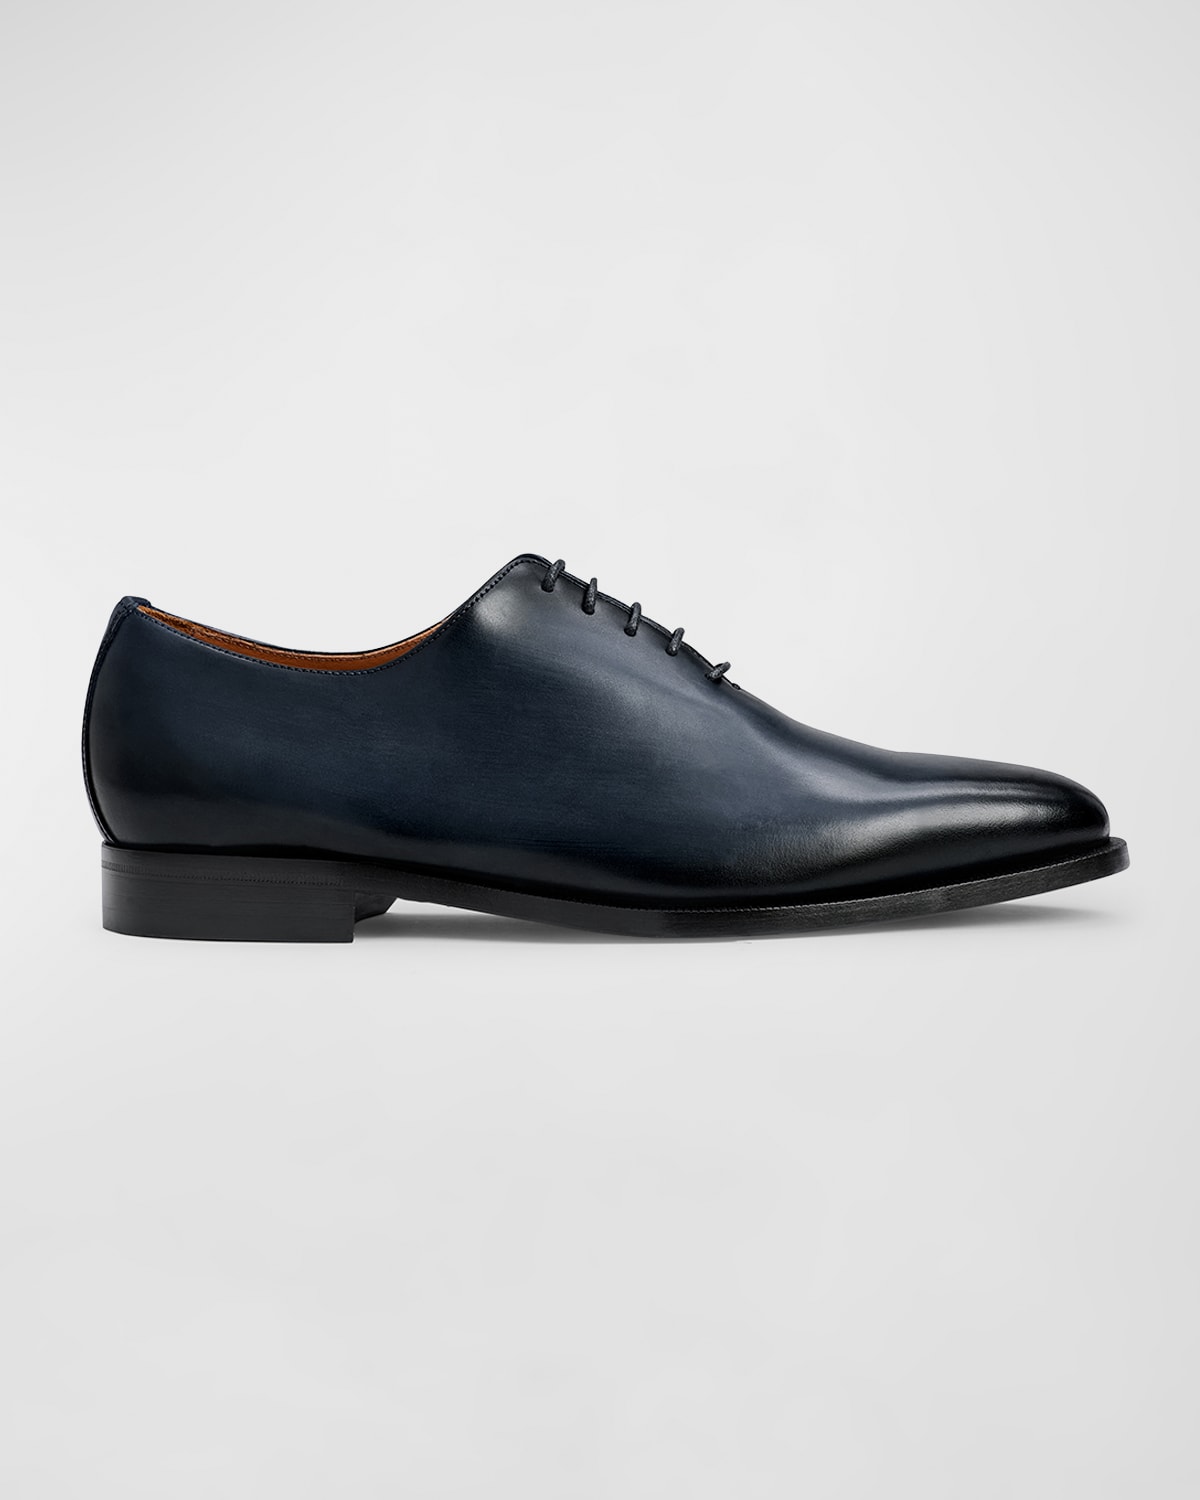 TOM FORD Men's Elkan Burnished Leather Oxfords | Neiman Marcus